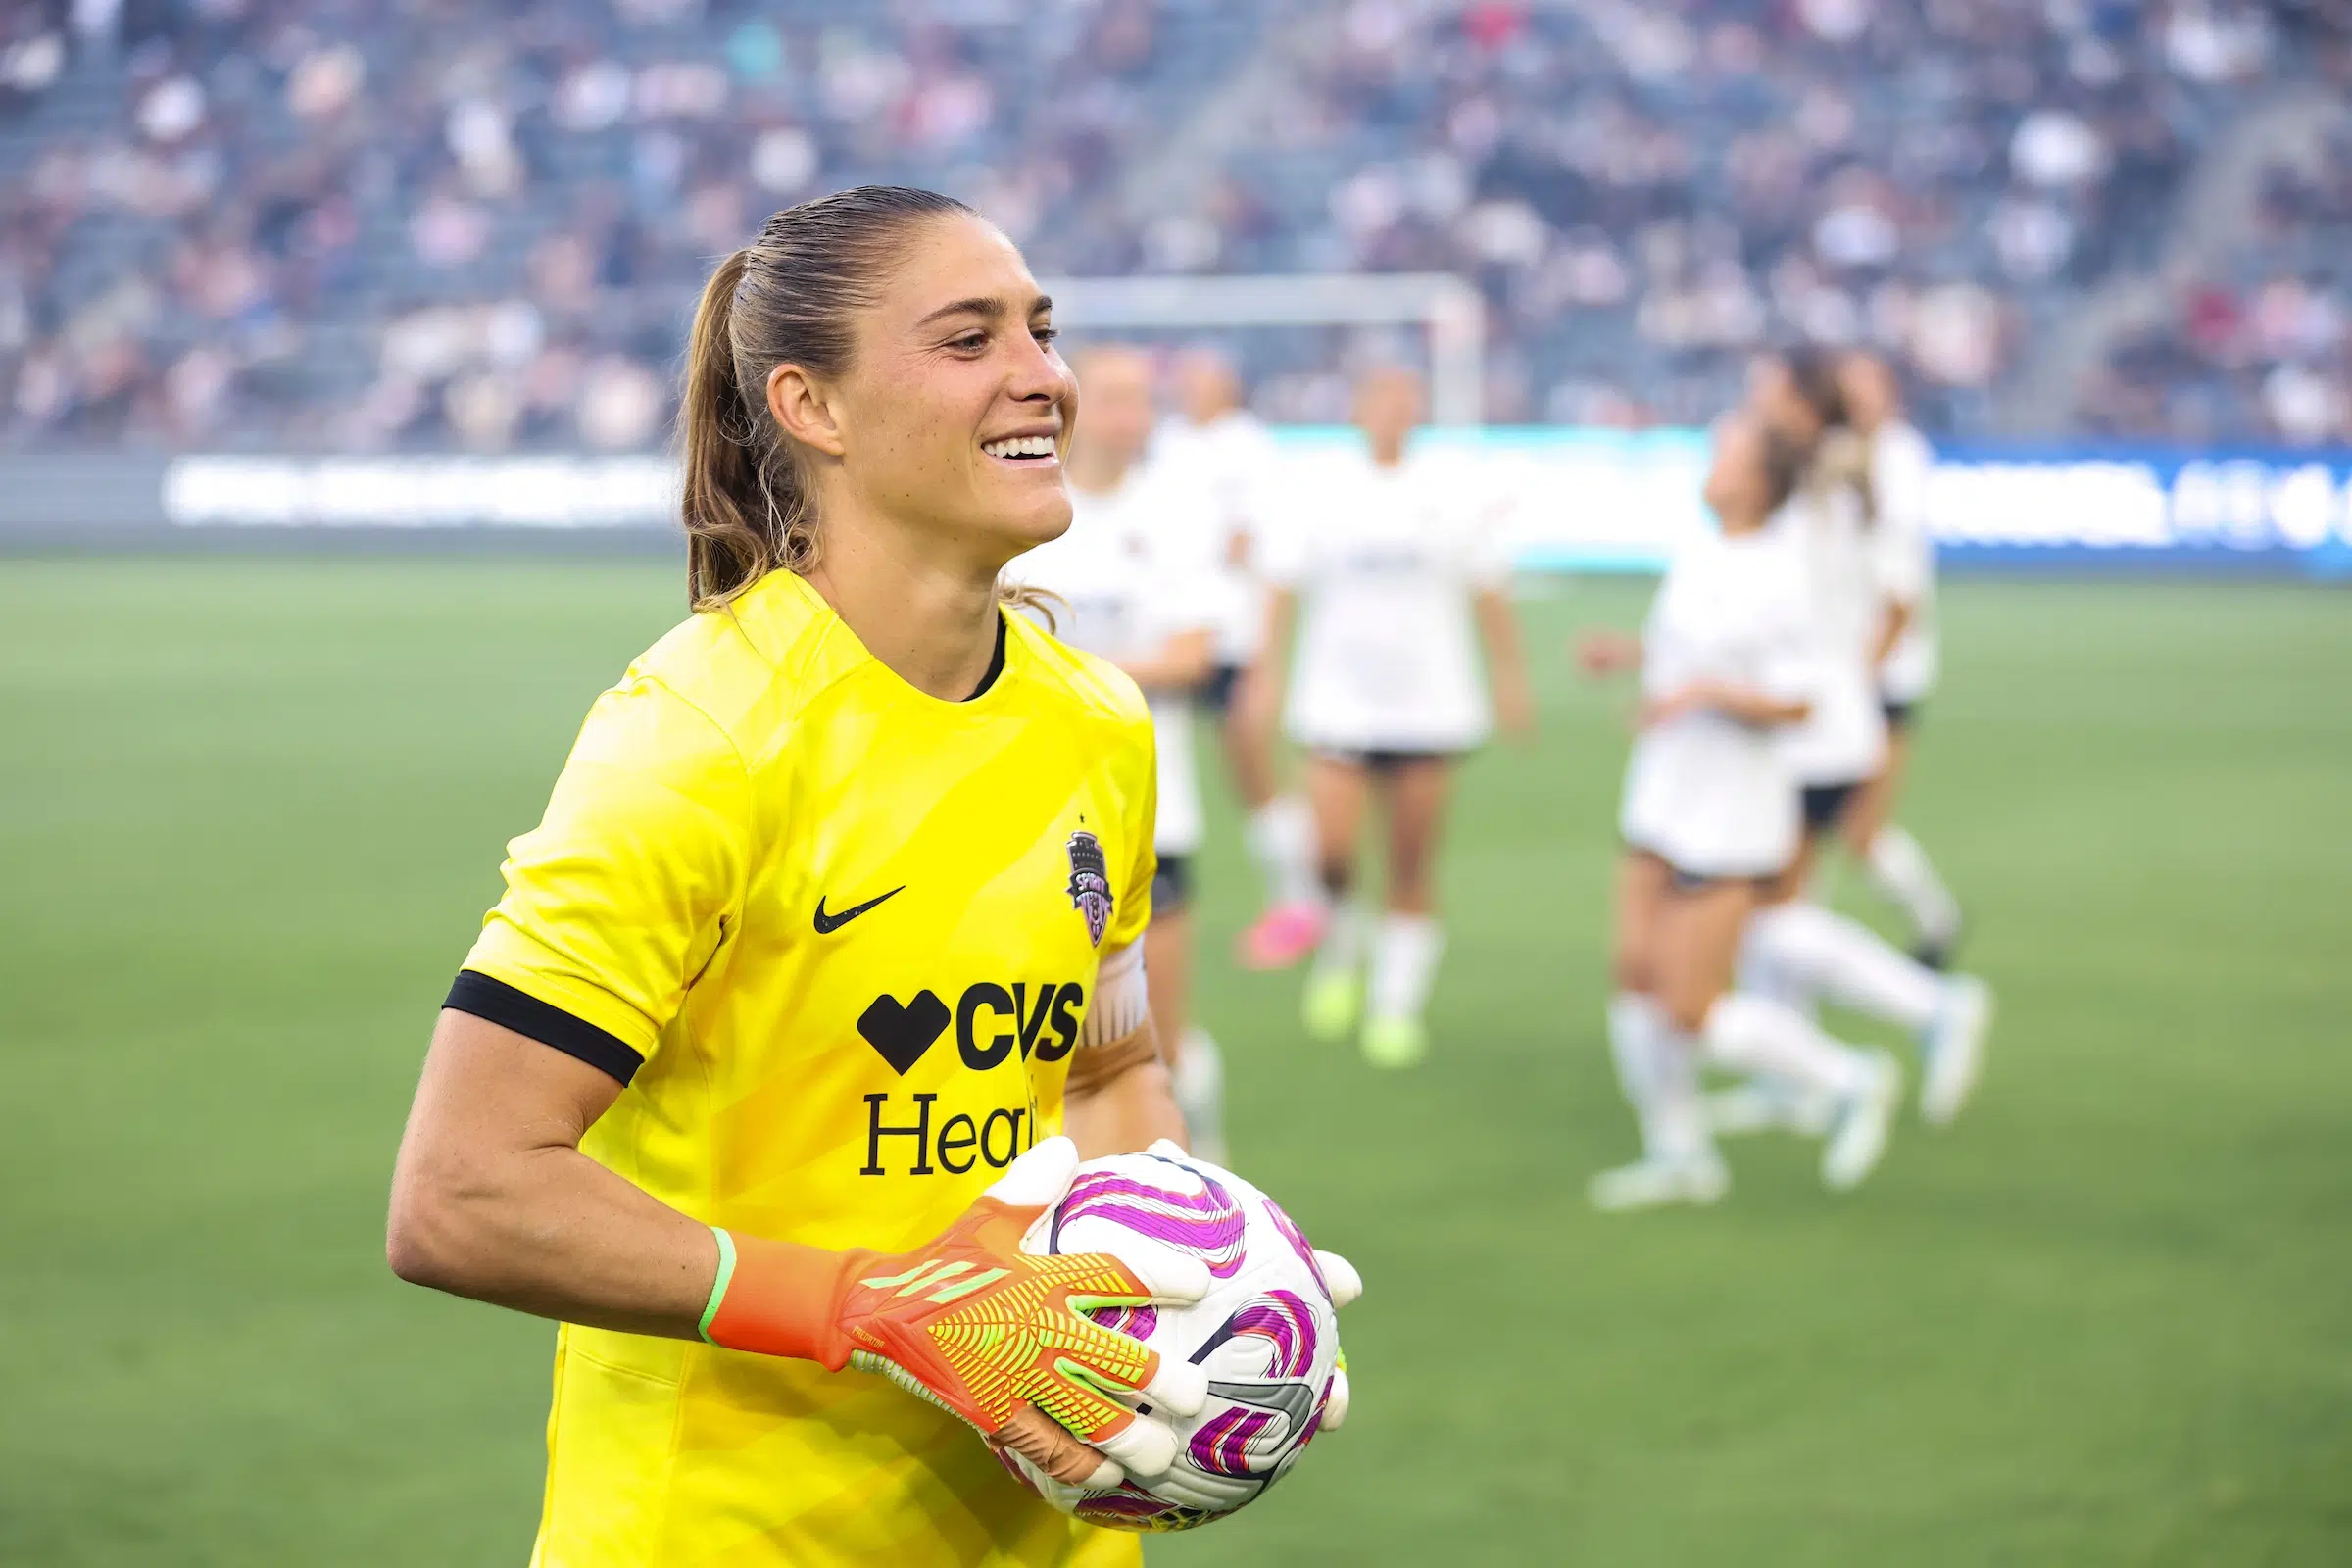 Ashley Hatch in a yellow uniform smiles as she holds a soccer ball in two hands.